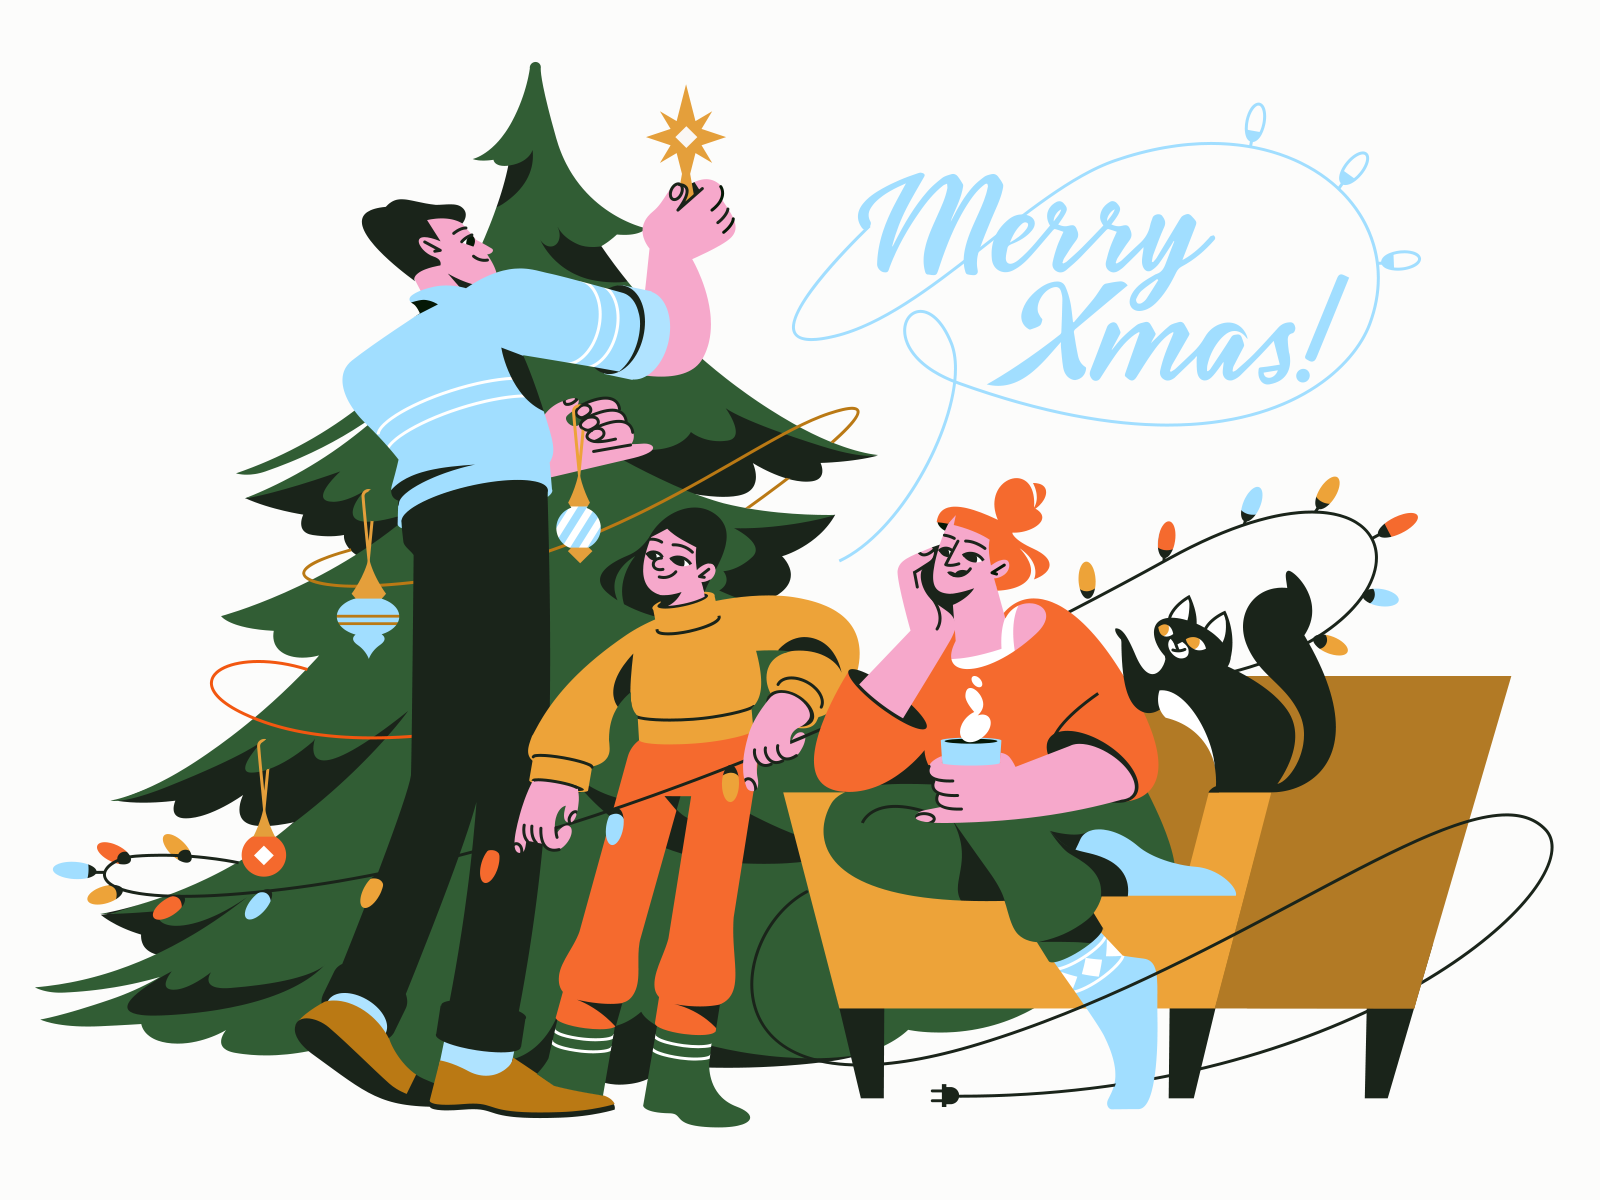 Happy Christmas! ⛄️? christmas time christmas bauble topper happiness atmosphere decorating happy christmas happy holidays christmas party family christmas tree character illustration christmas character design illustrator shakuro character design art illustration